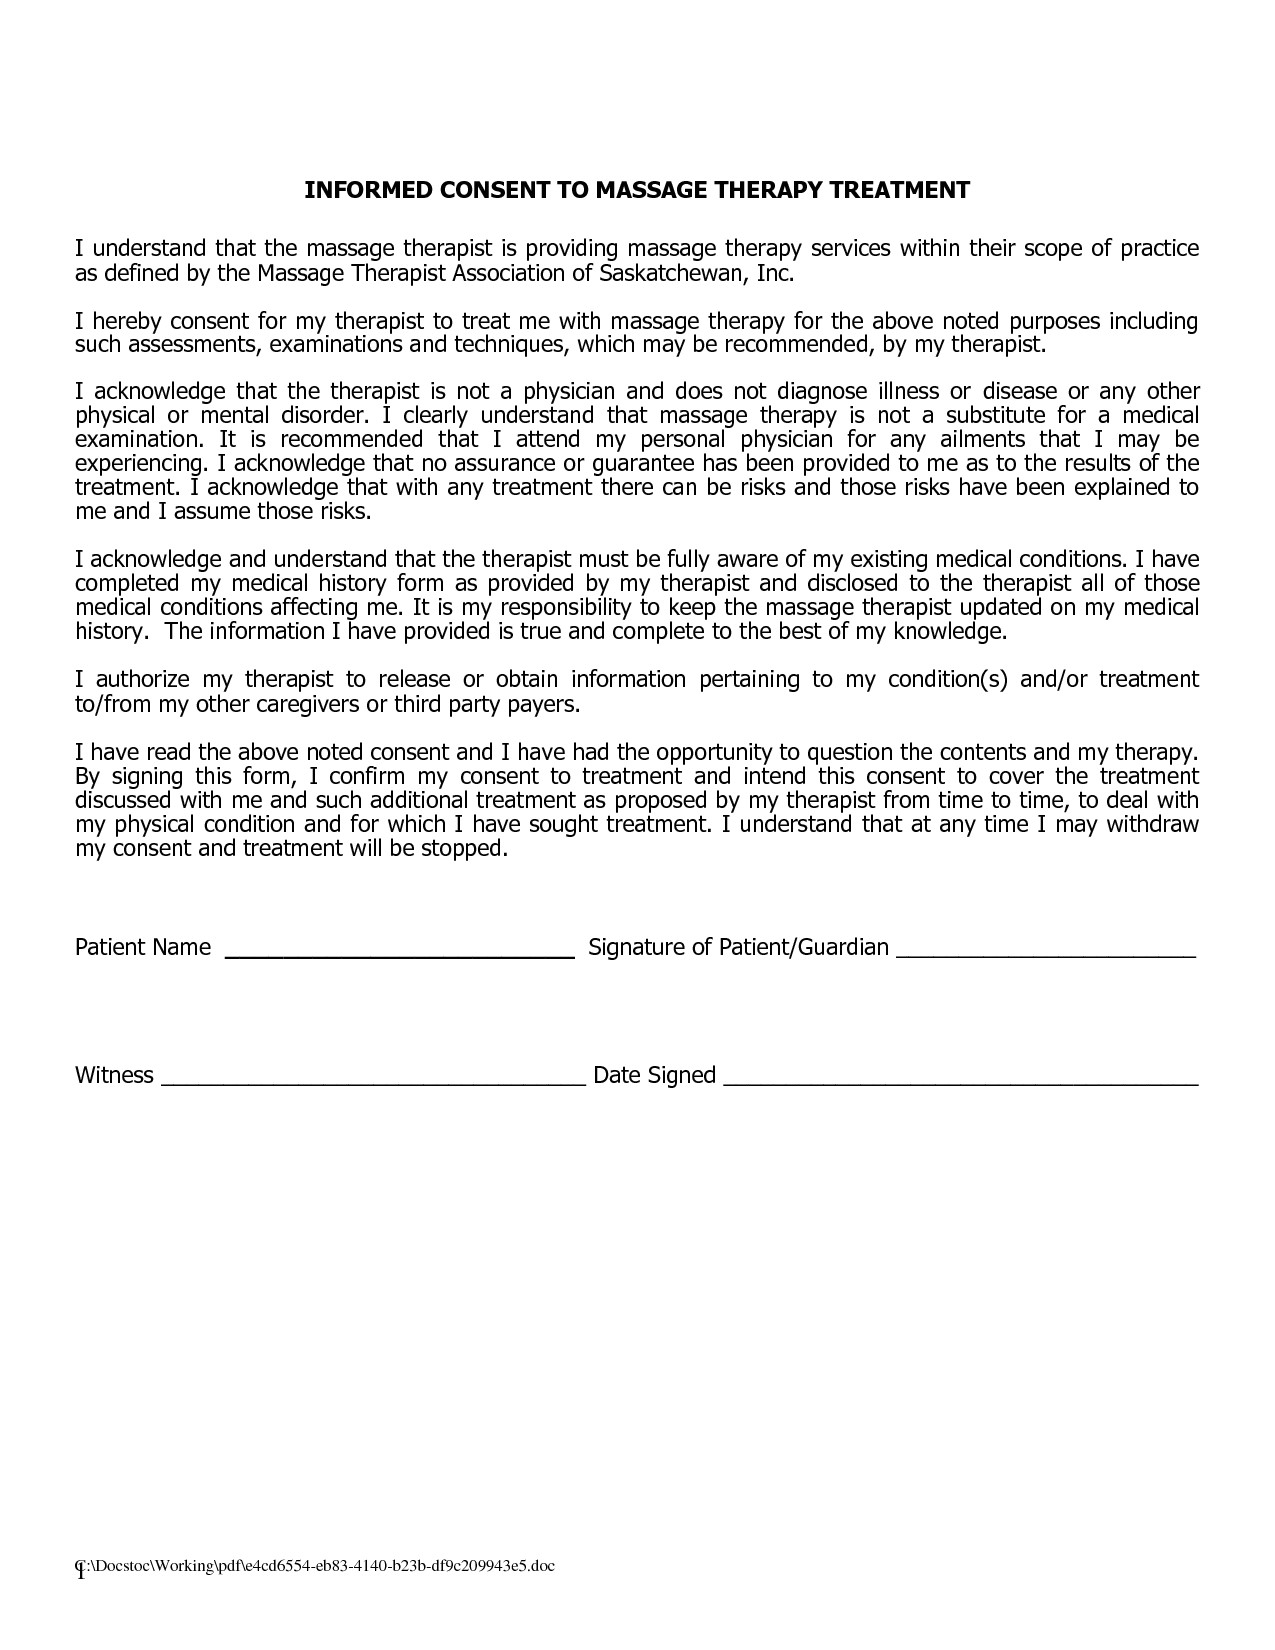 post psychotherapy informed consent template 307992